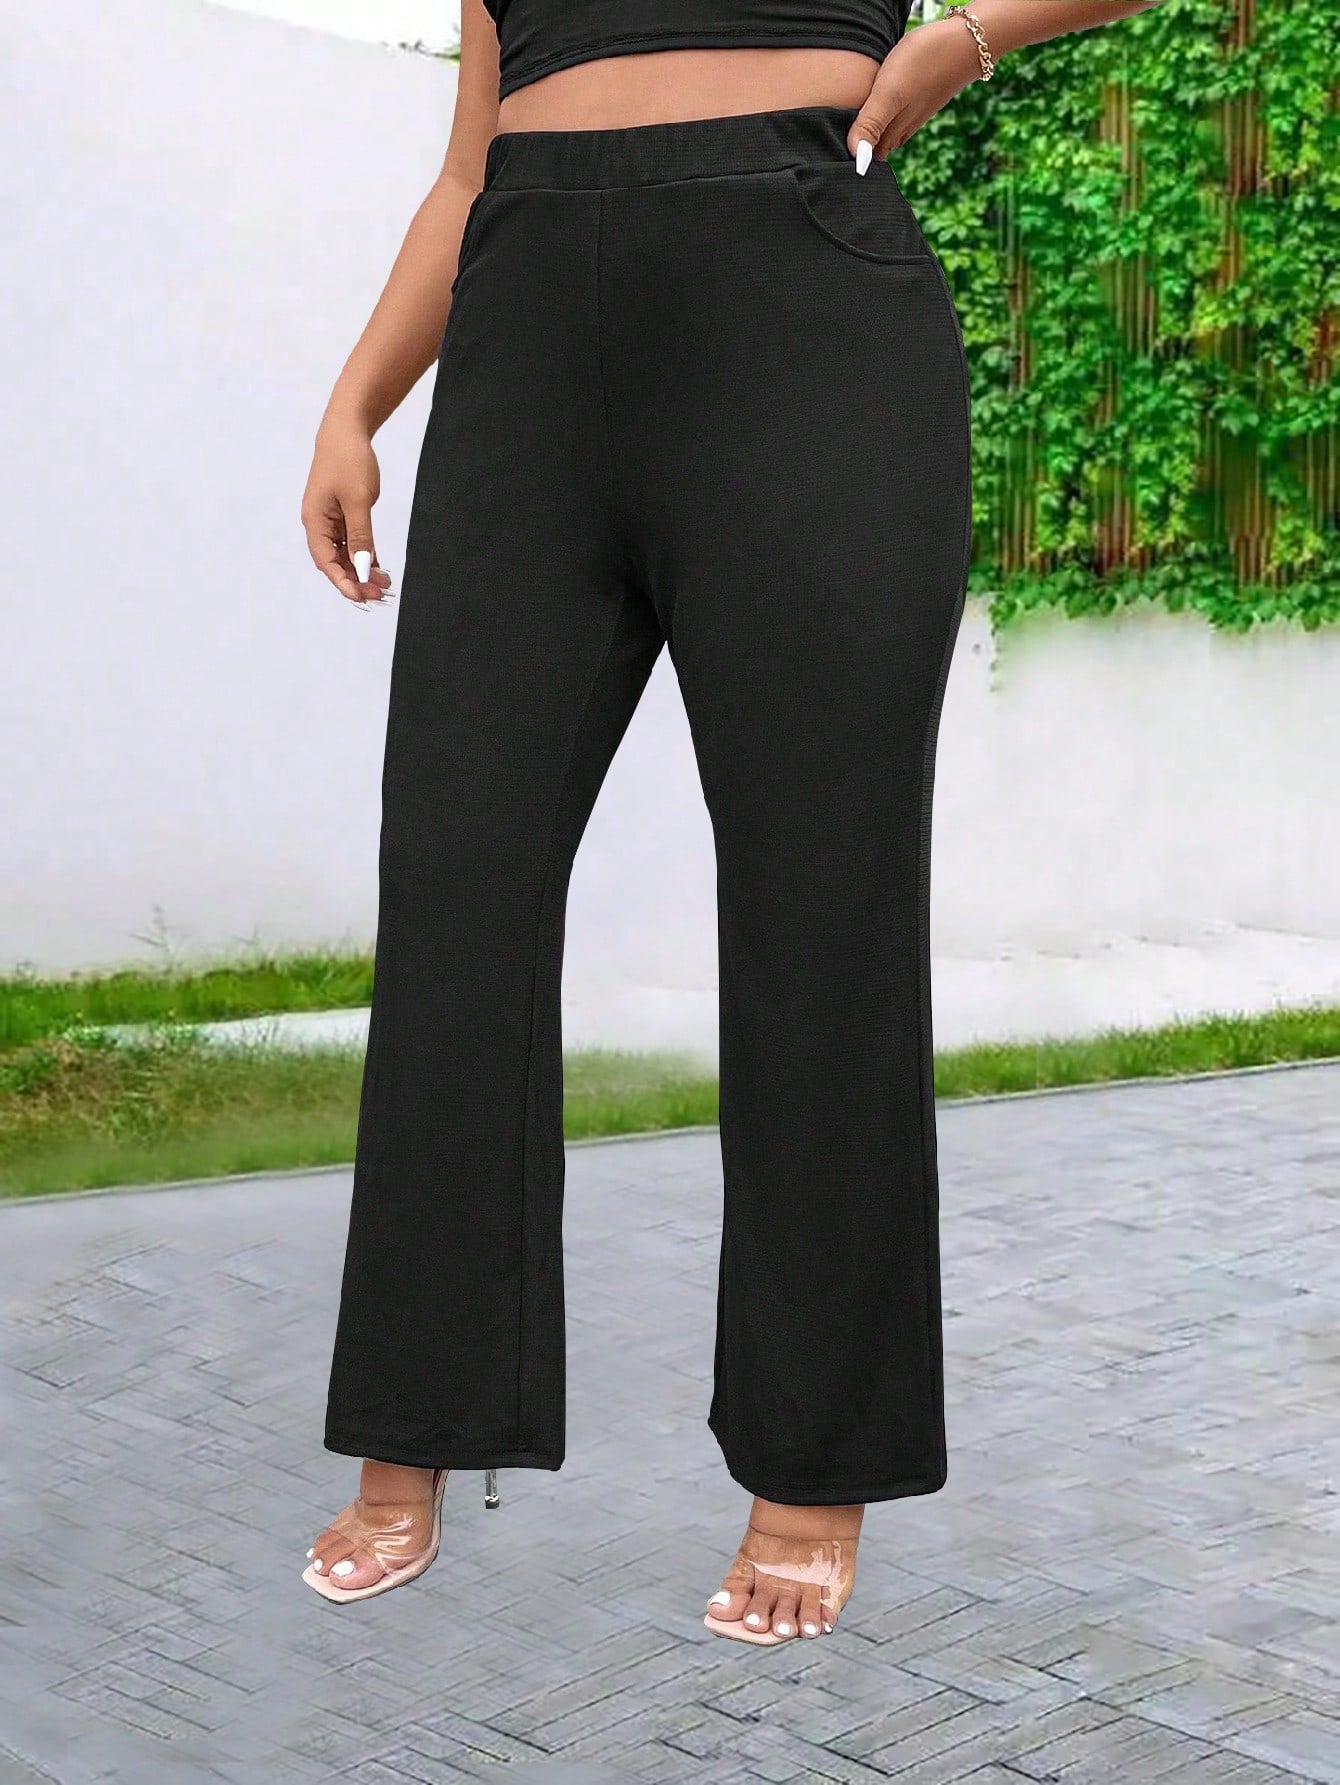 Plus Size Women's Solid Color Pocketed Pants